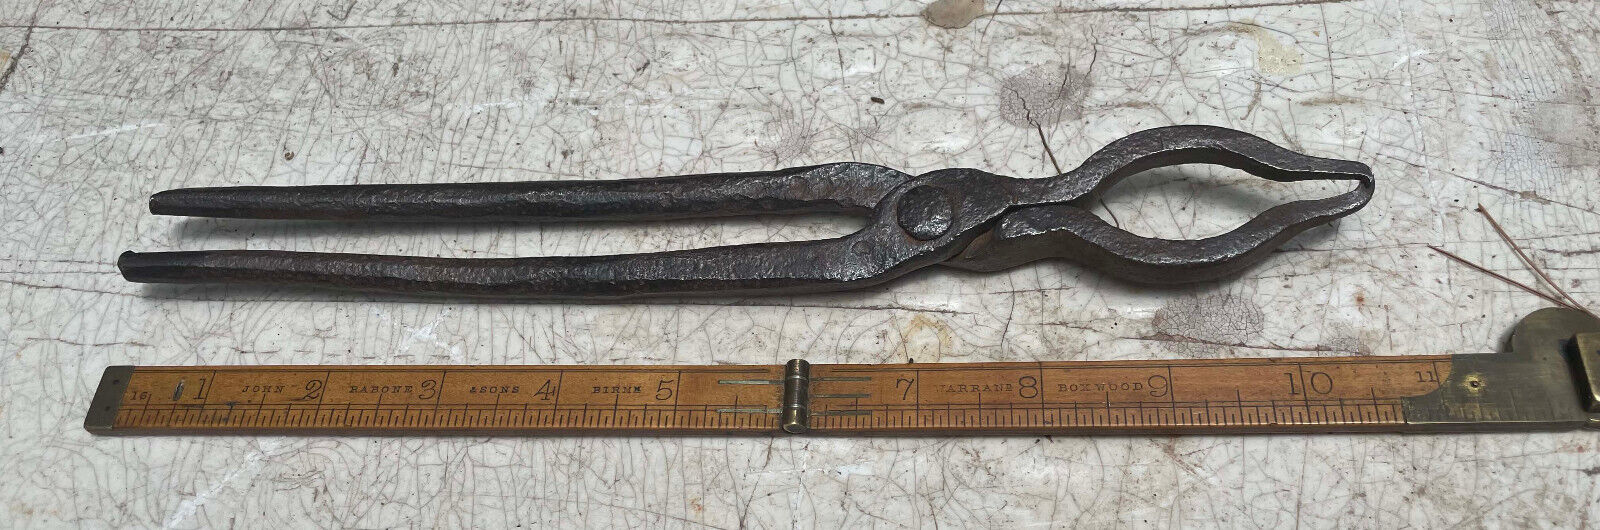 Antique Hand Forged Tongs For Forging And Blacksmithing 10 1/2`` Specialty